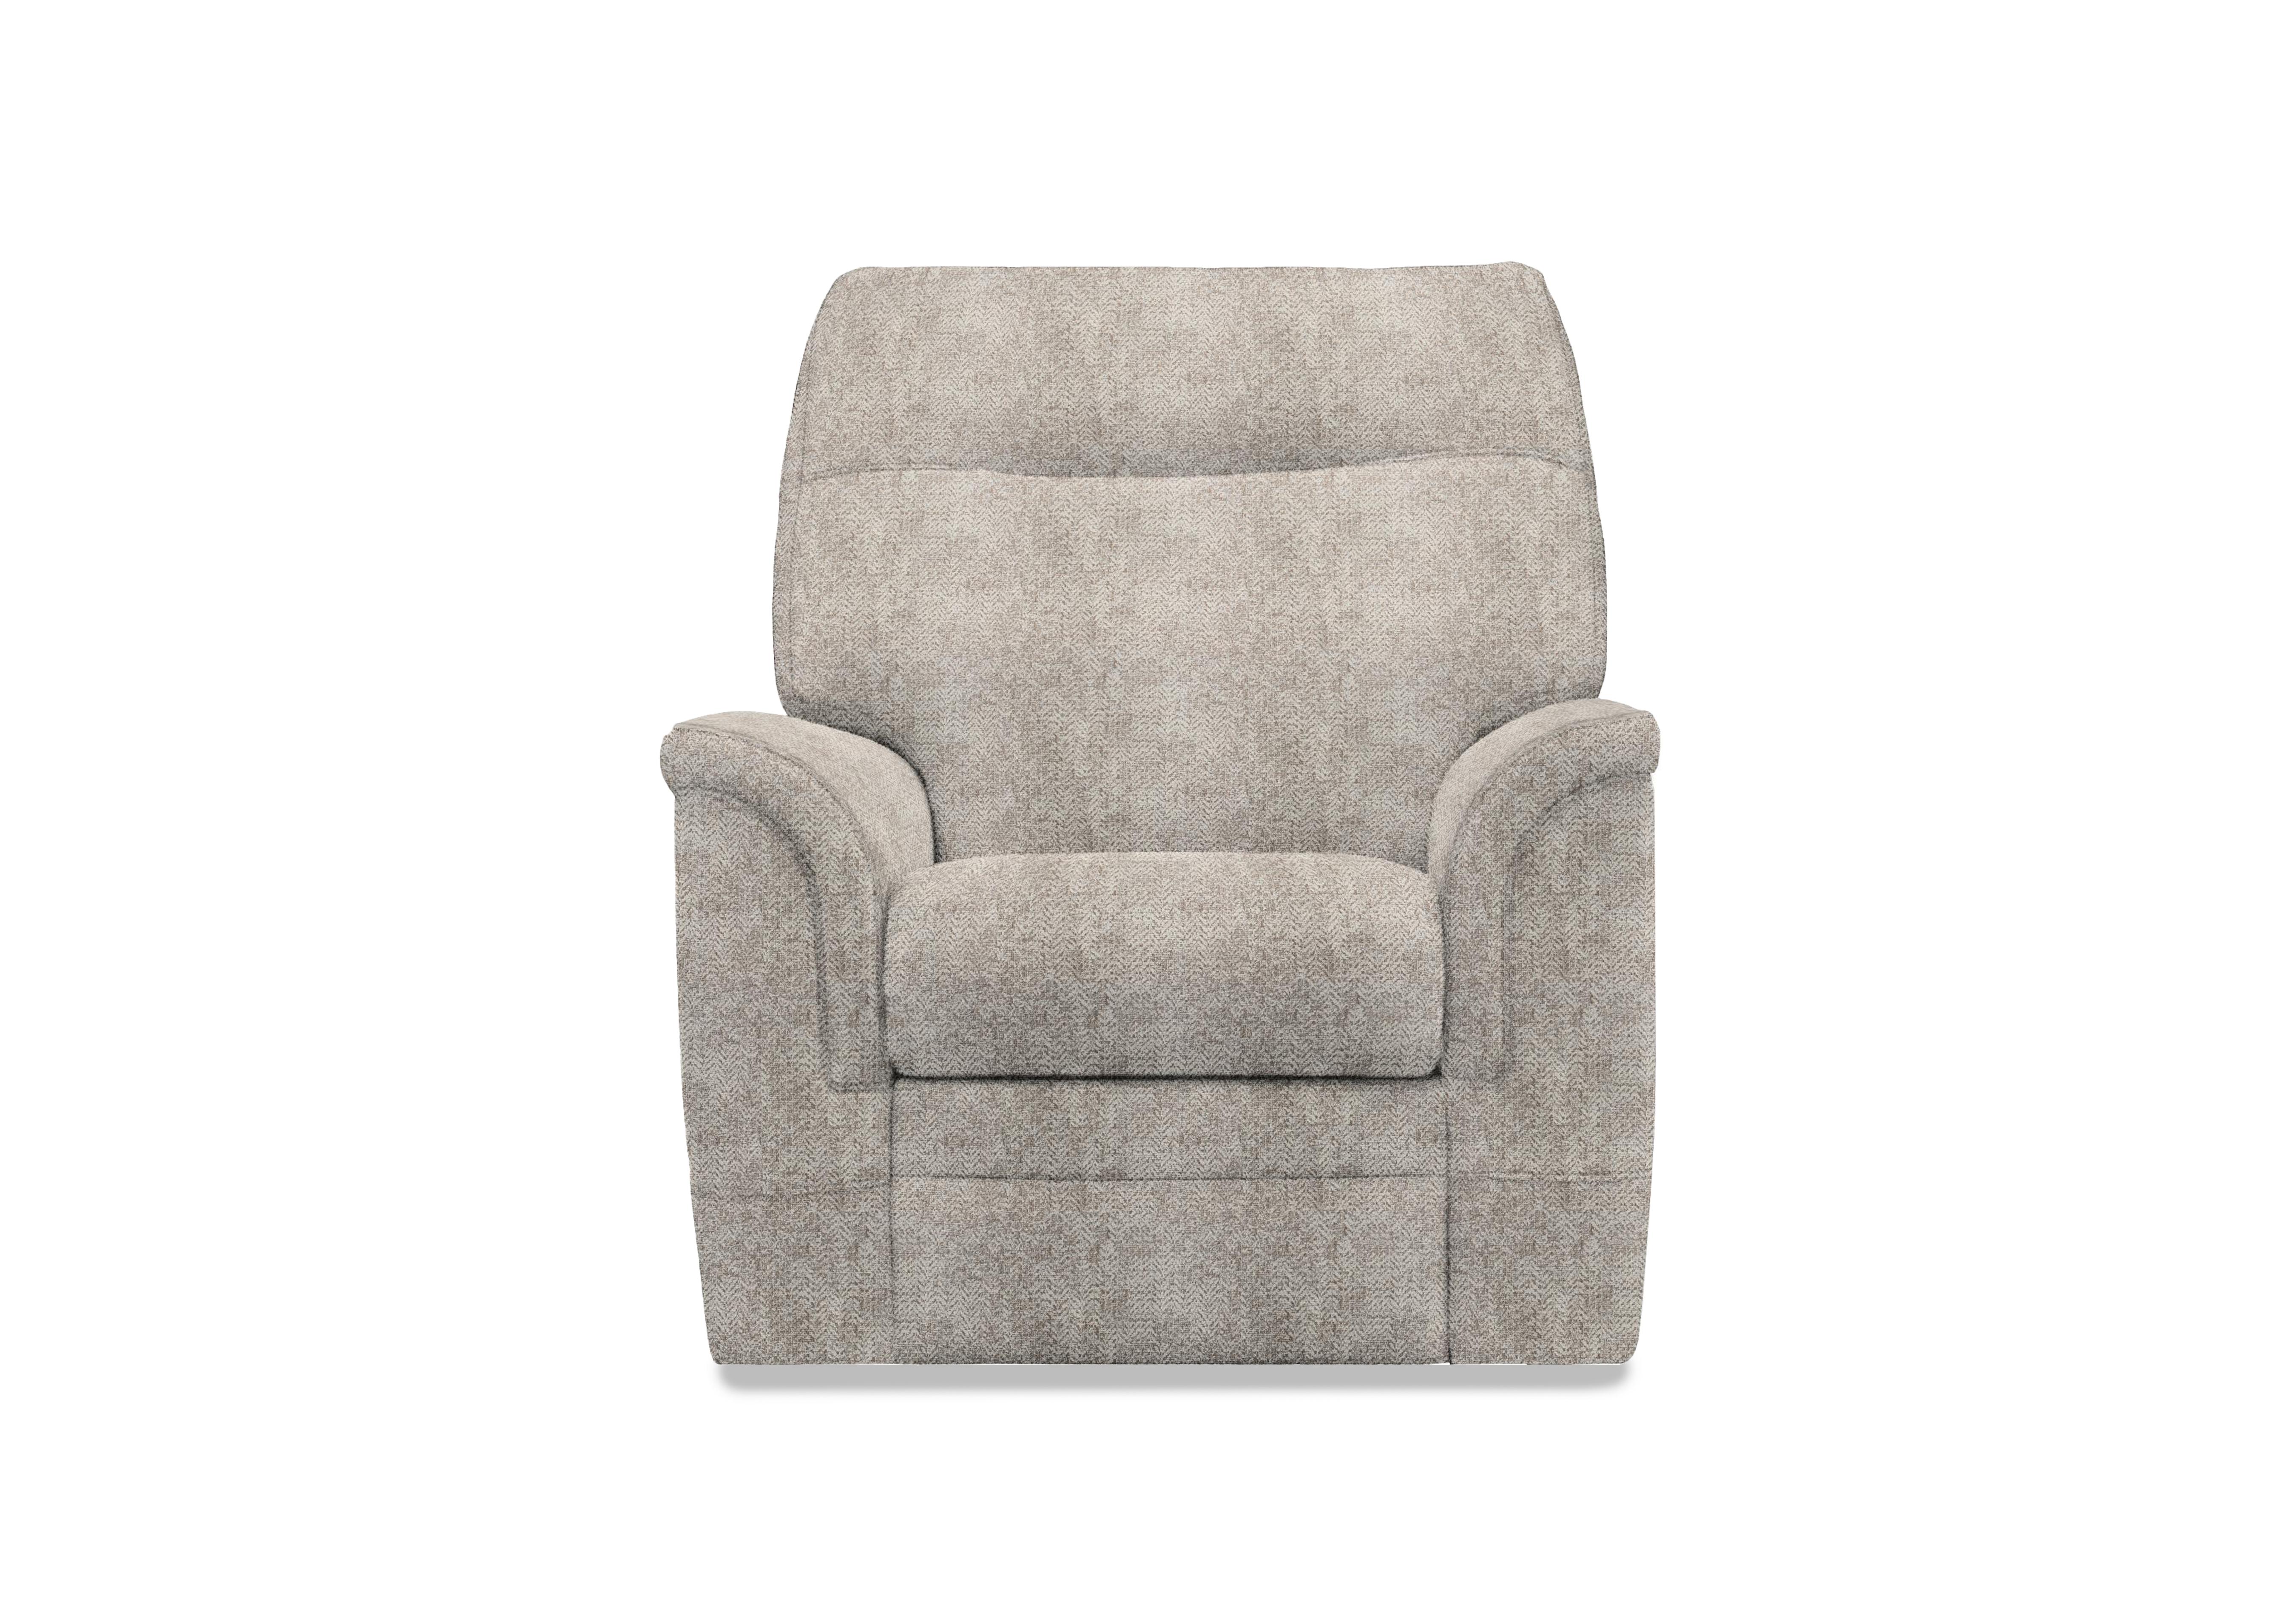 Hudson 23 Fabric Lift and Rise Chair in Ida Stone 006035-0055 on Furniture Village